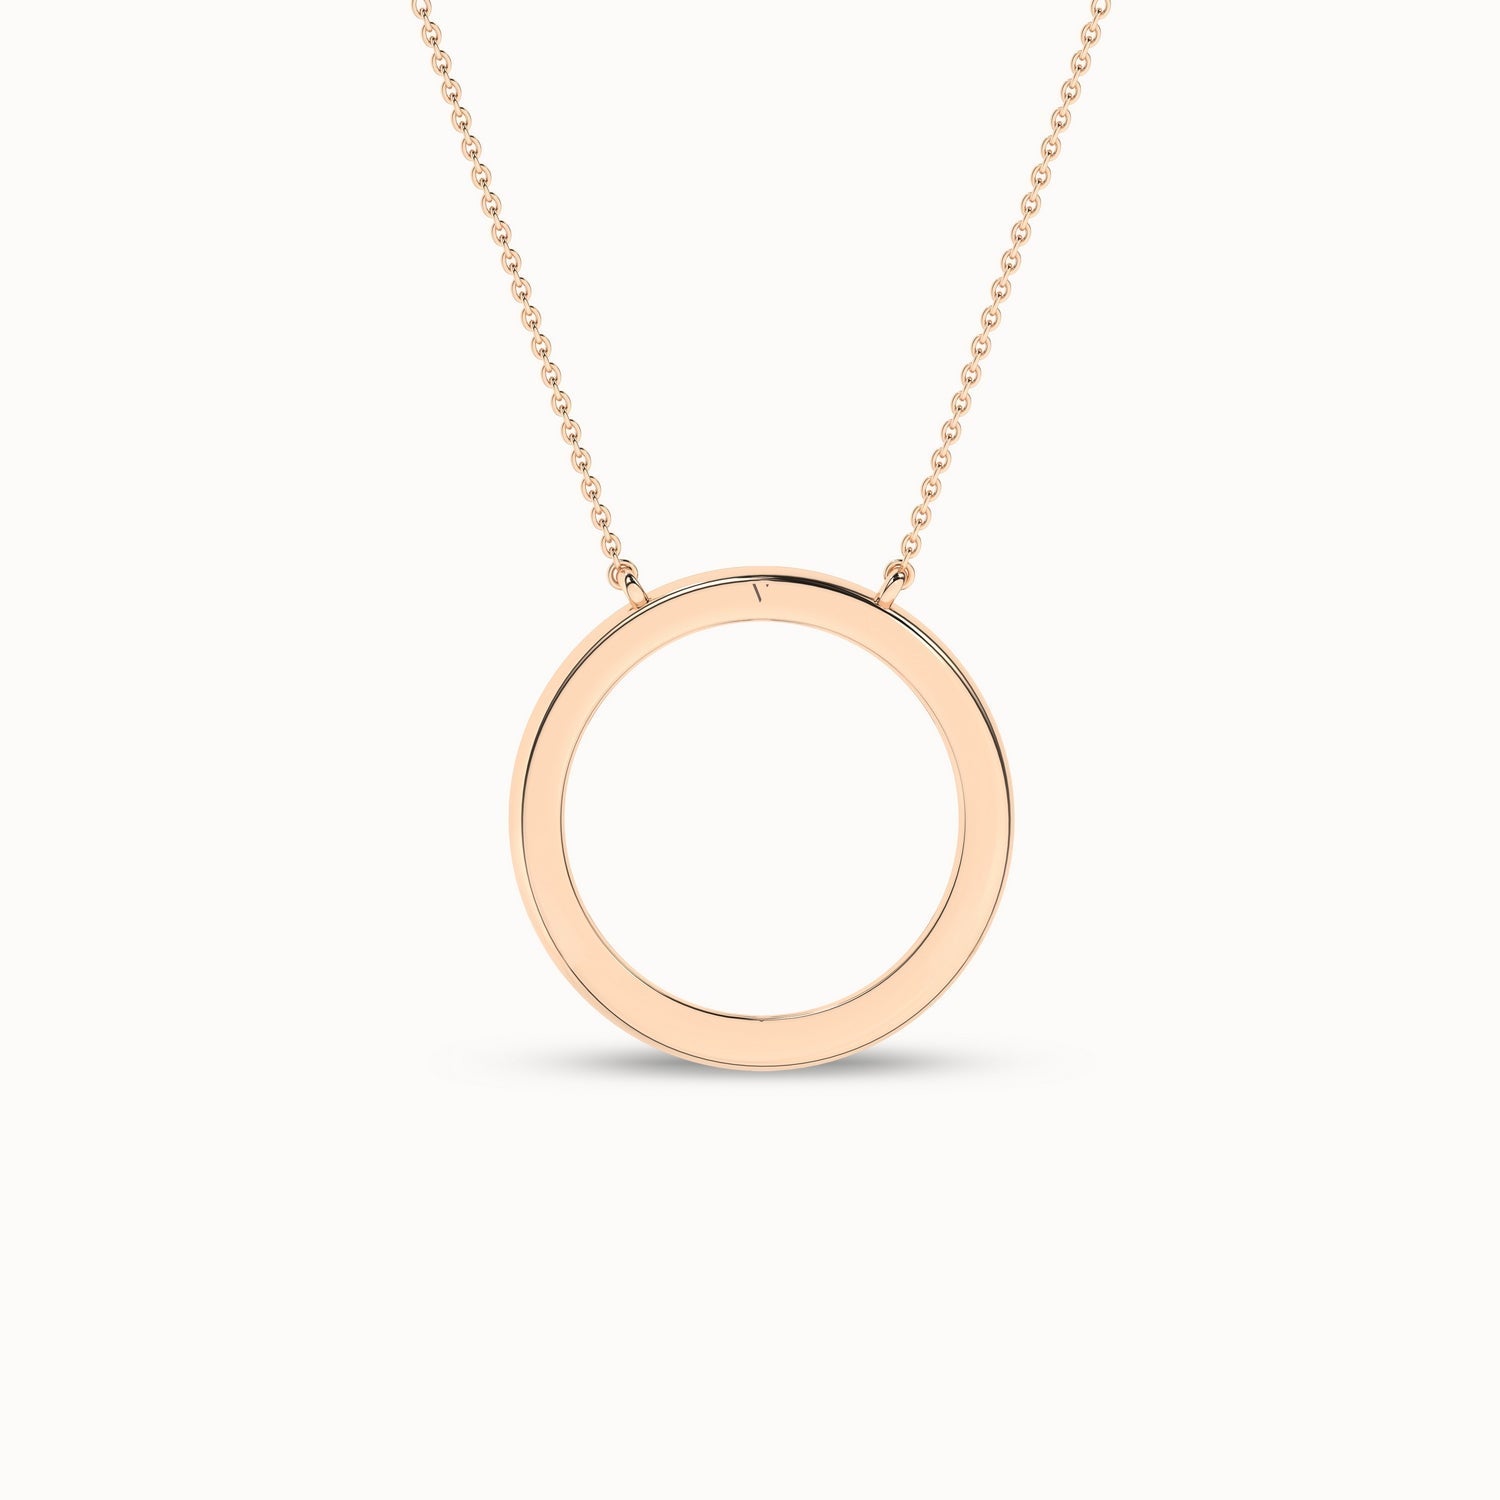 Circular Silhouette Necklace_Product Angle_1/3Ct. - 3